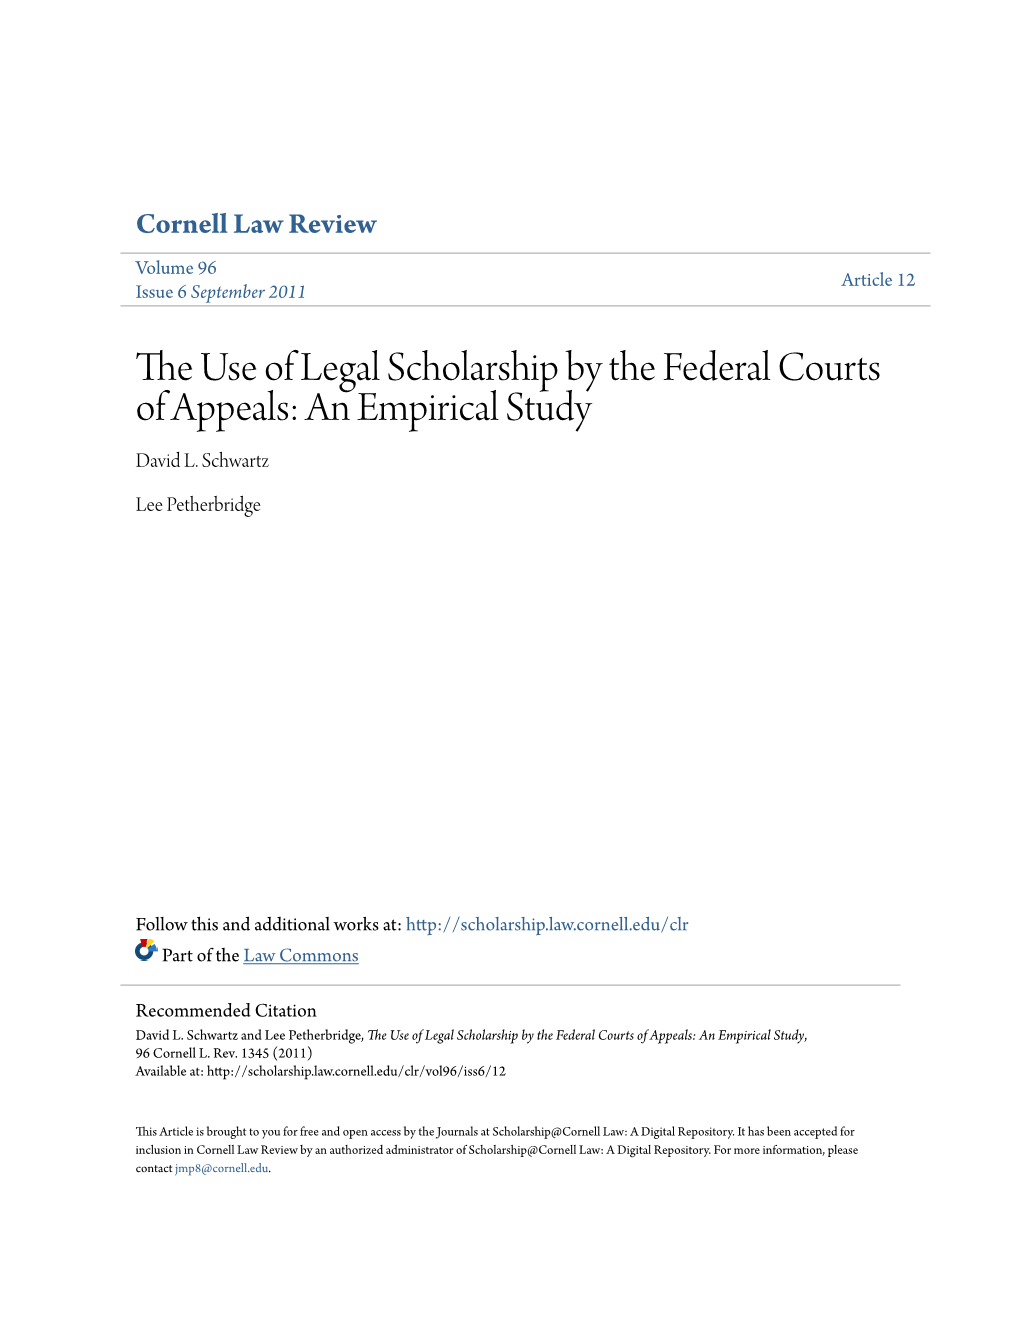 The Use of Legal Scholarship by the Federal Courts of Appeals: an Empirical Study, 96 Cornell L